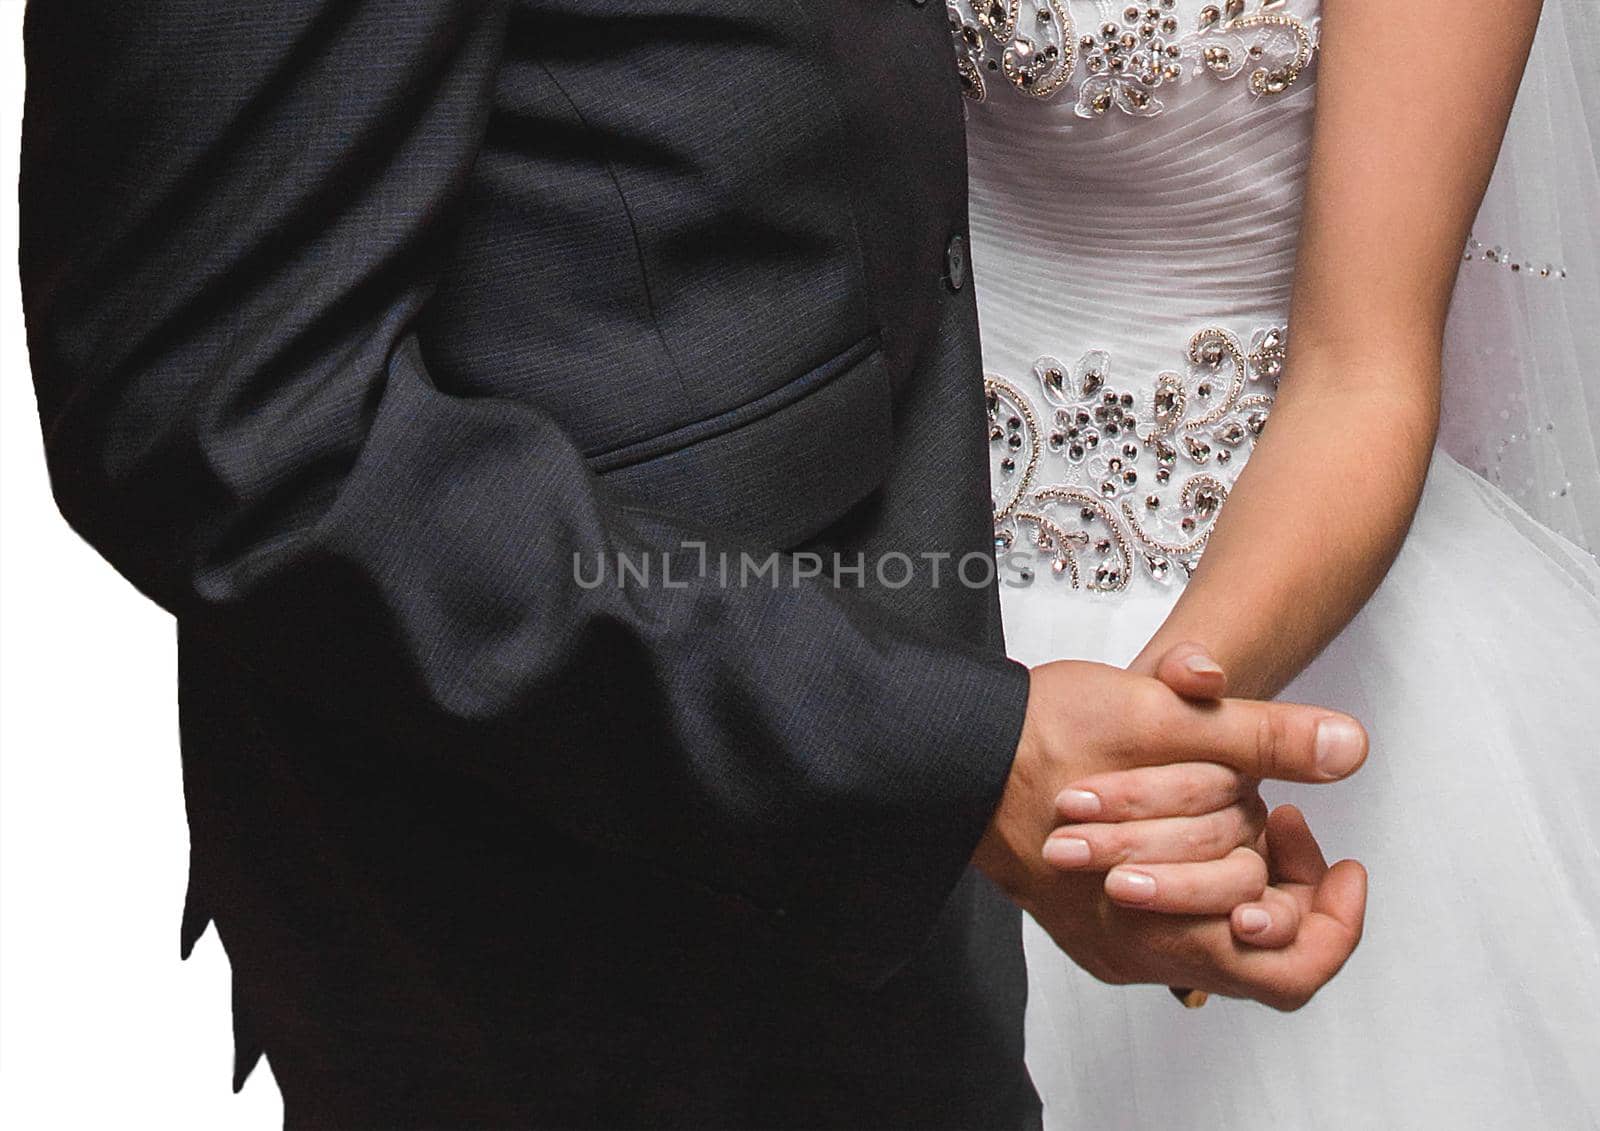 The bride and groom hold hands together tightly close-up at the wedding.